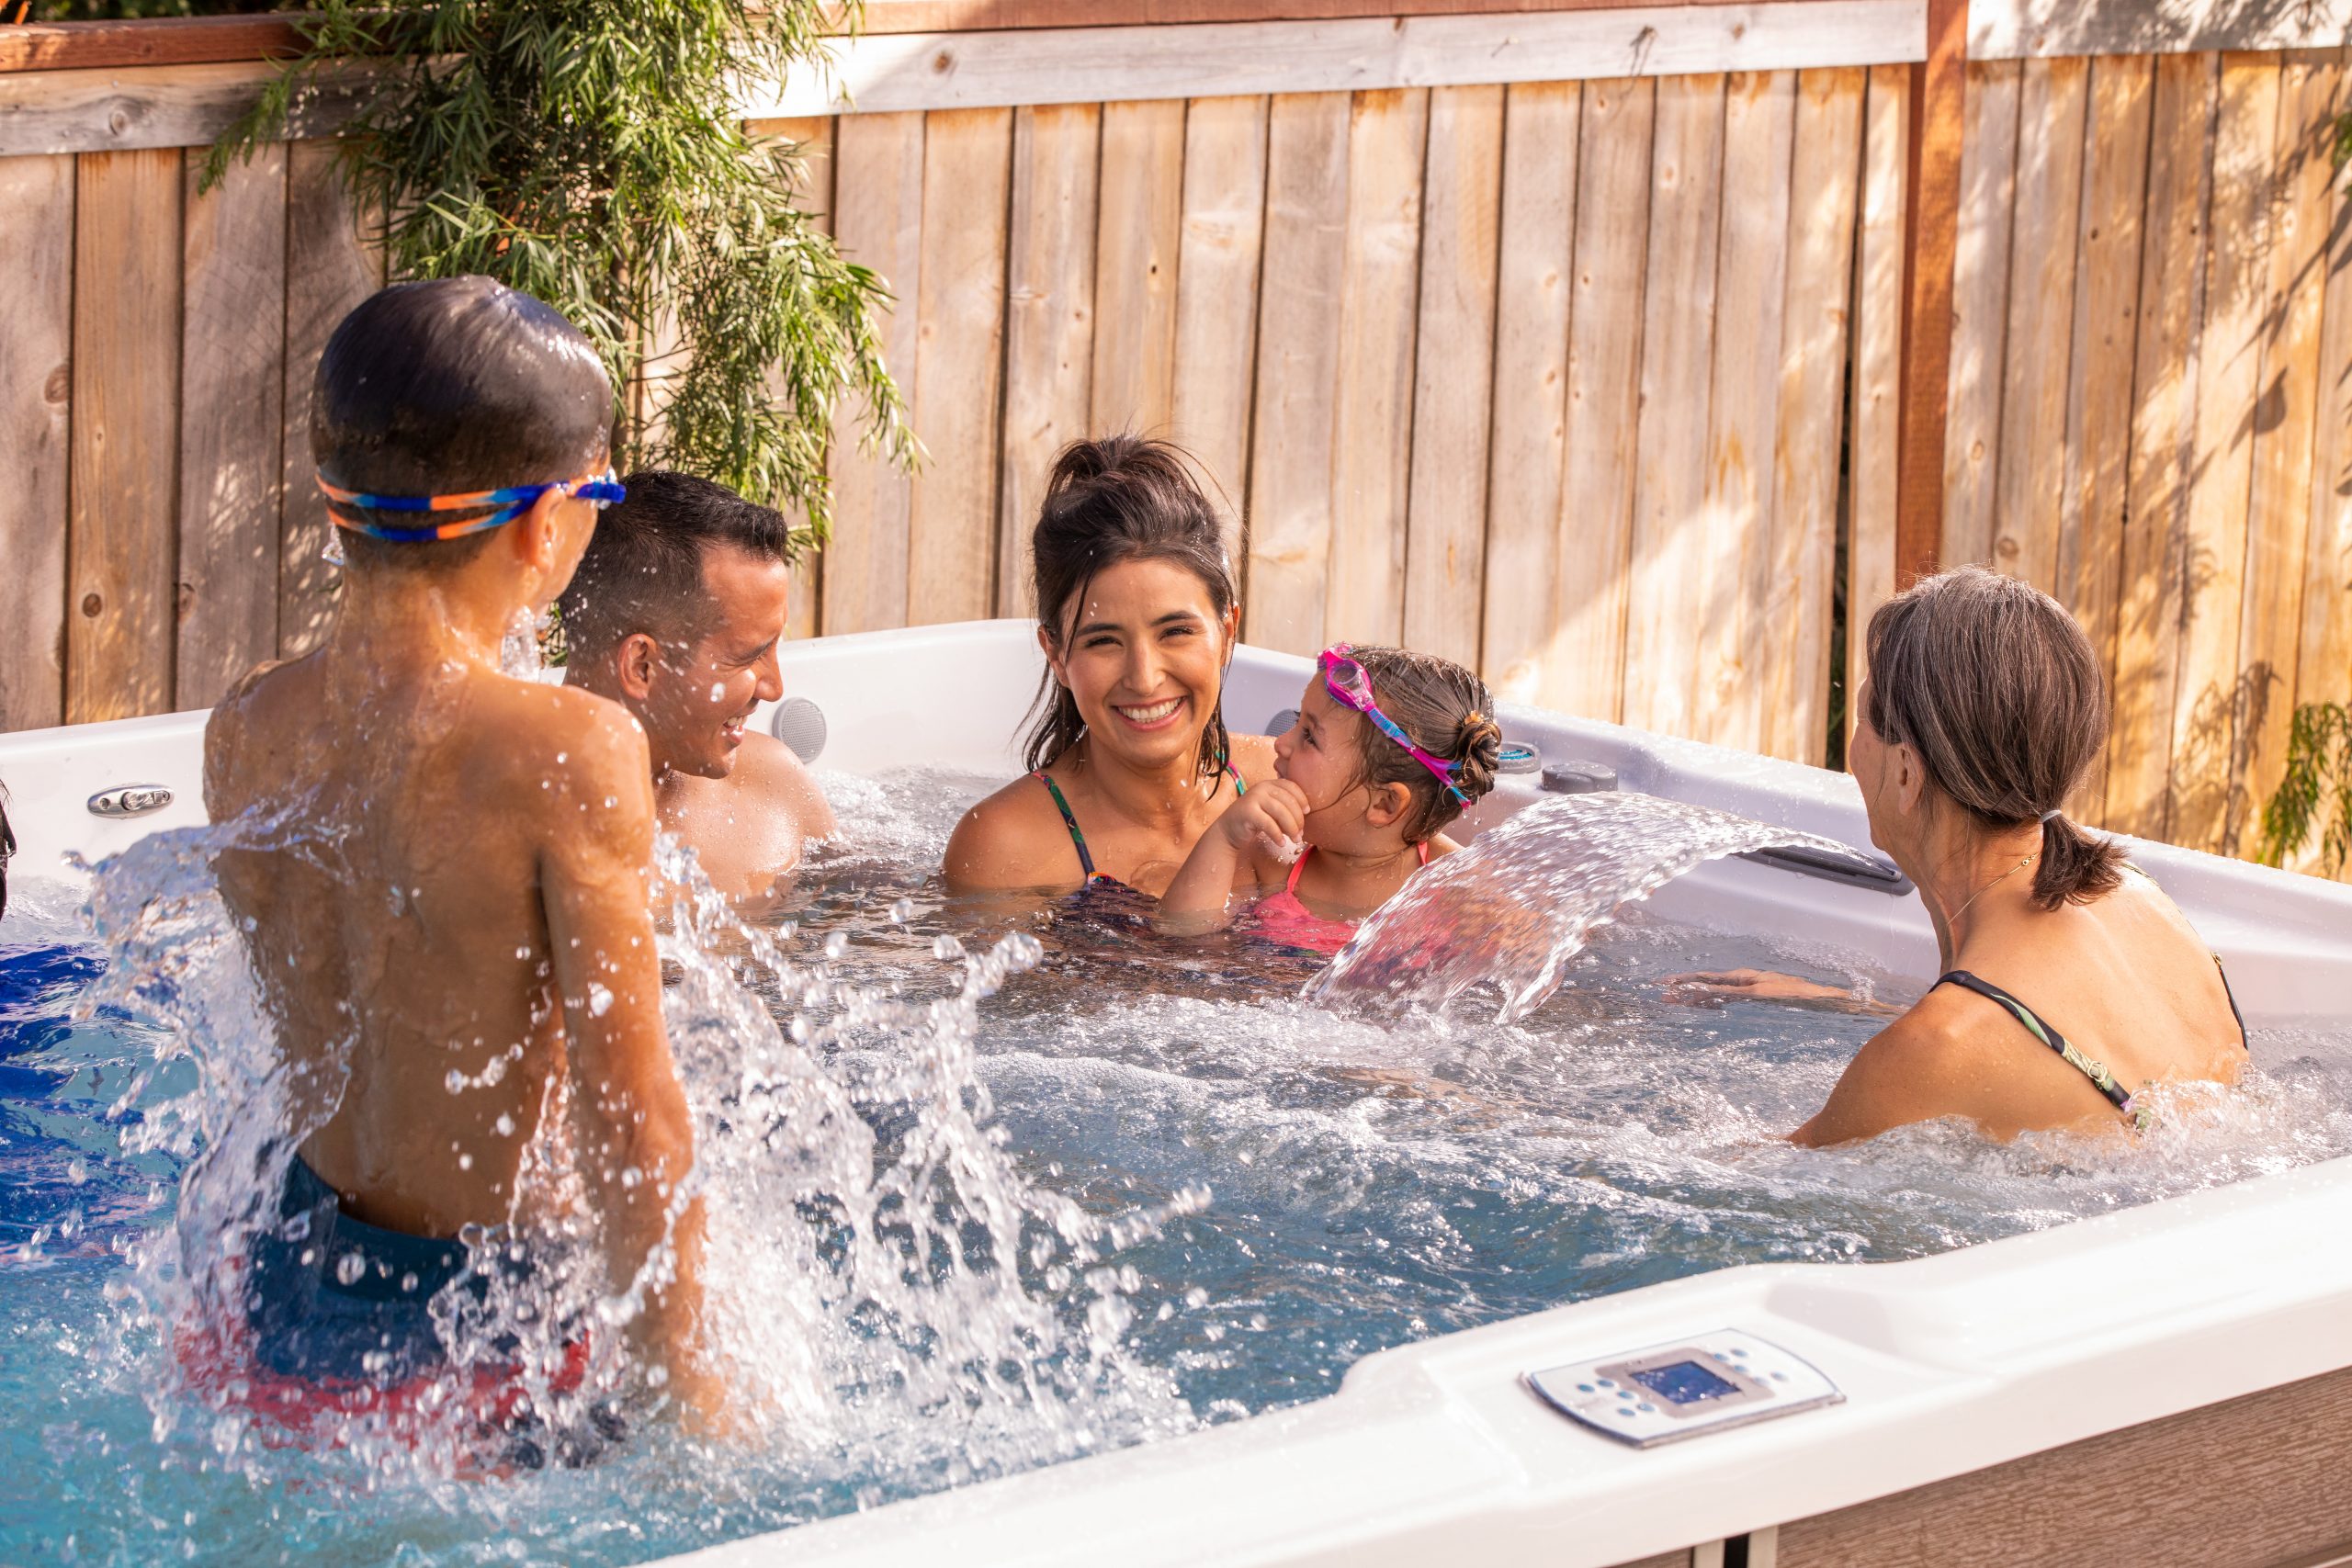 The Benefits of Spending Time with your Family in a Hot Tub